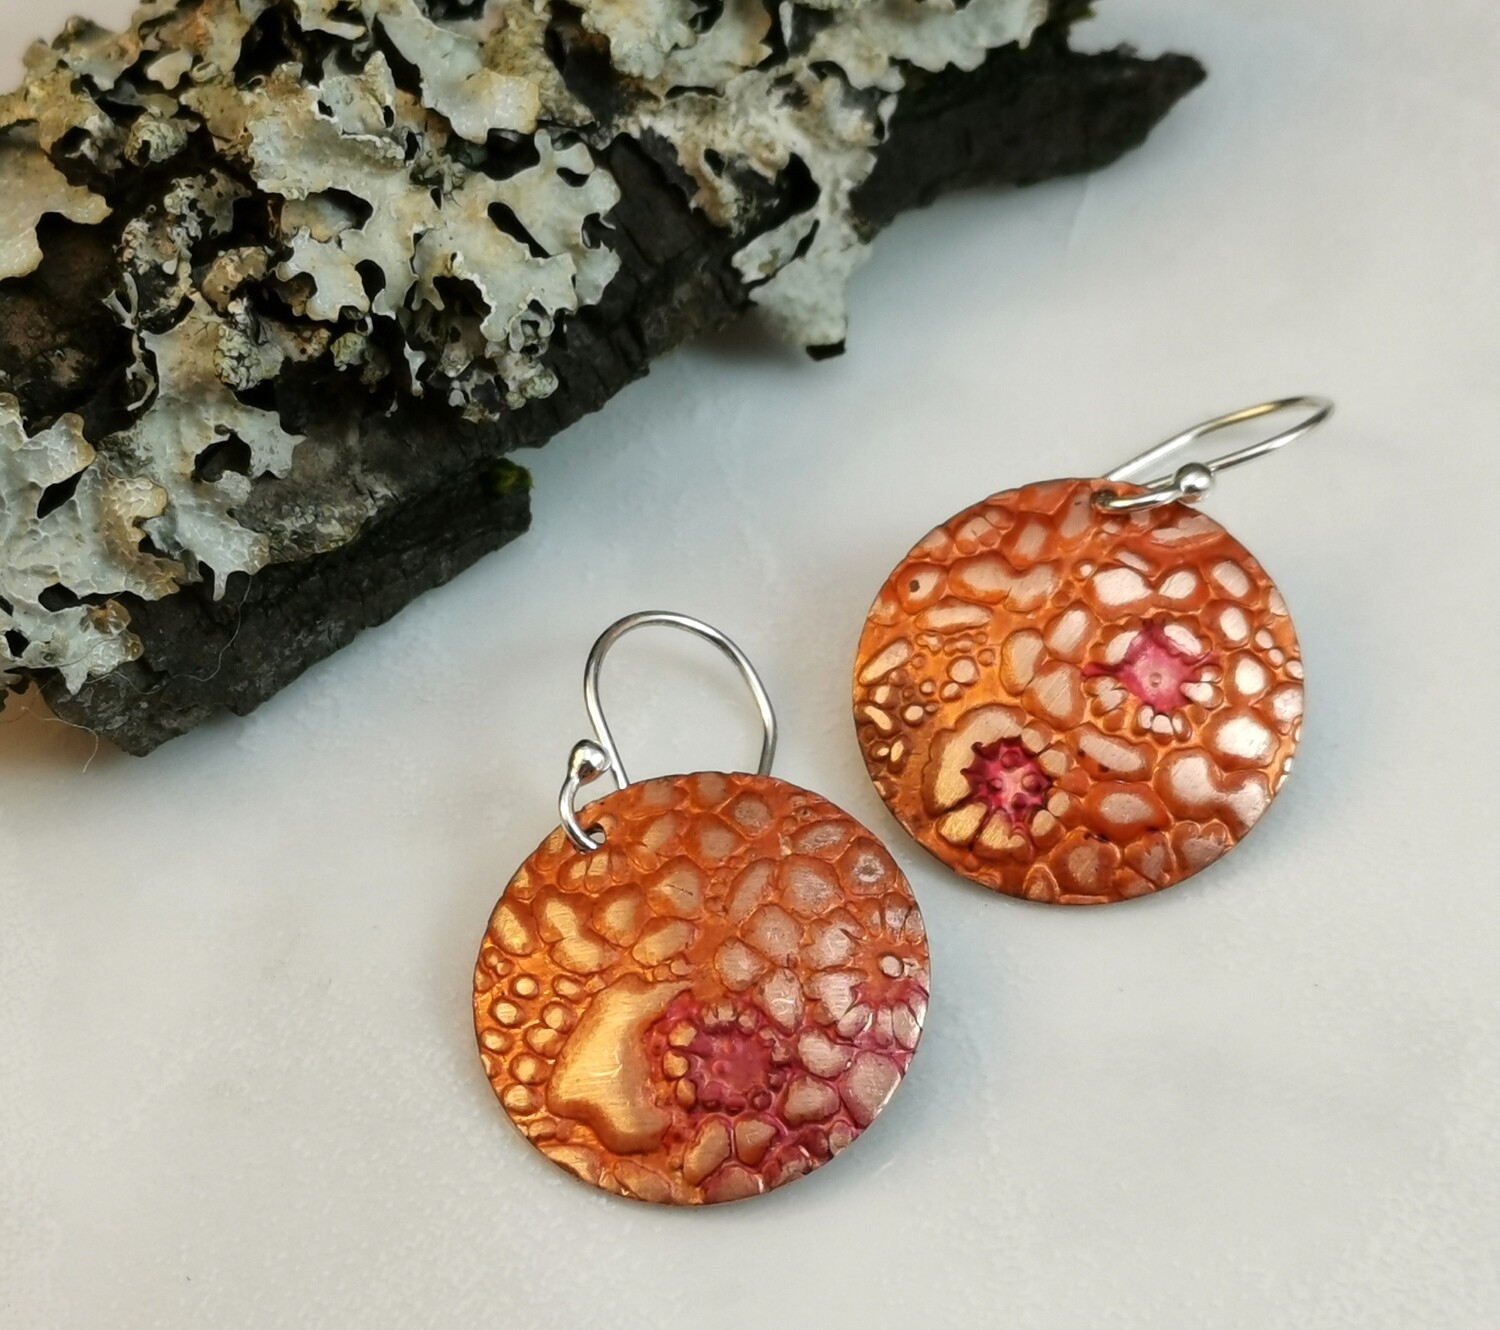 Round Flower Patterned Copper Earrings handpainted with hues of Tangerine Orange and Raspberry on Sterling Silver Ear Wires